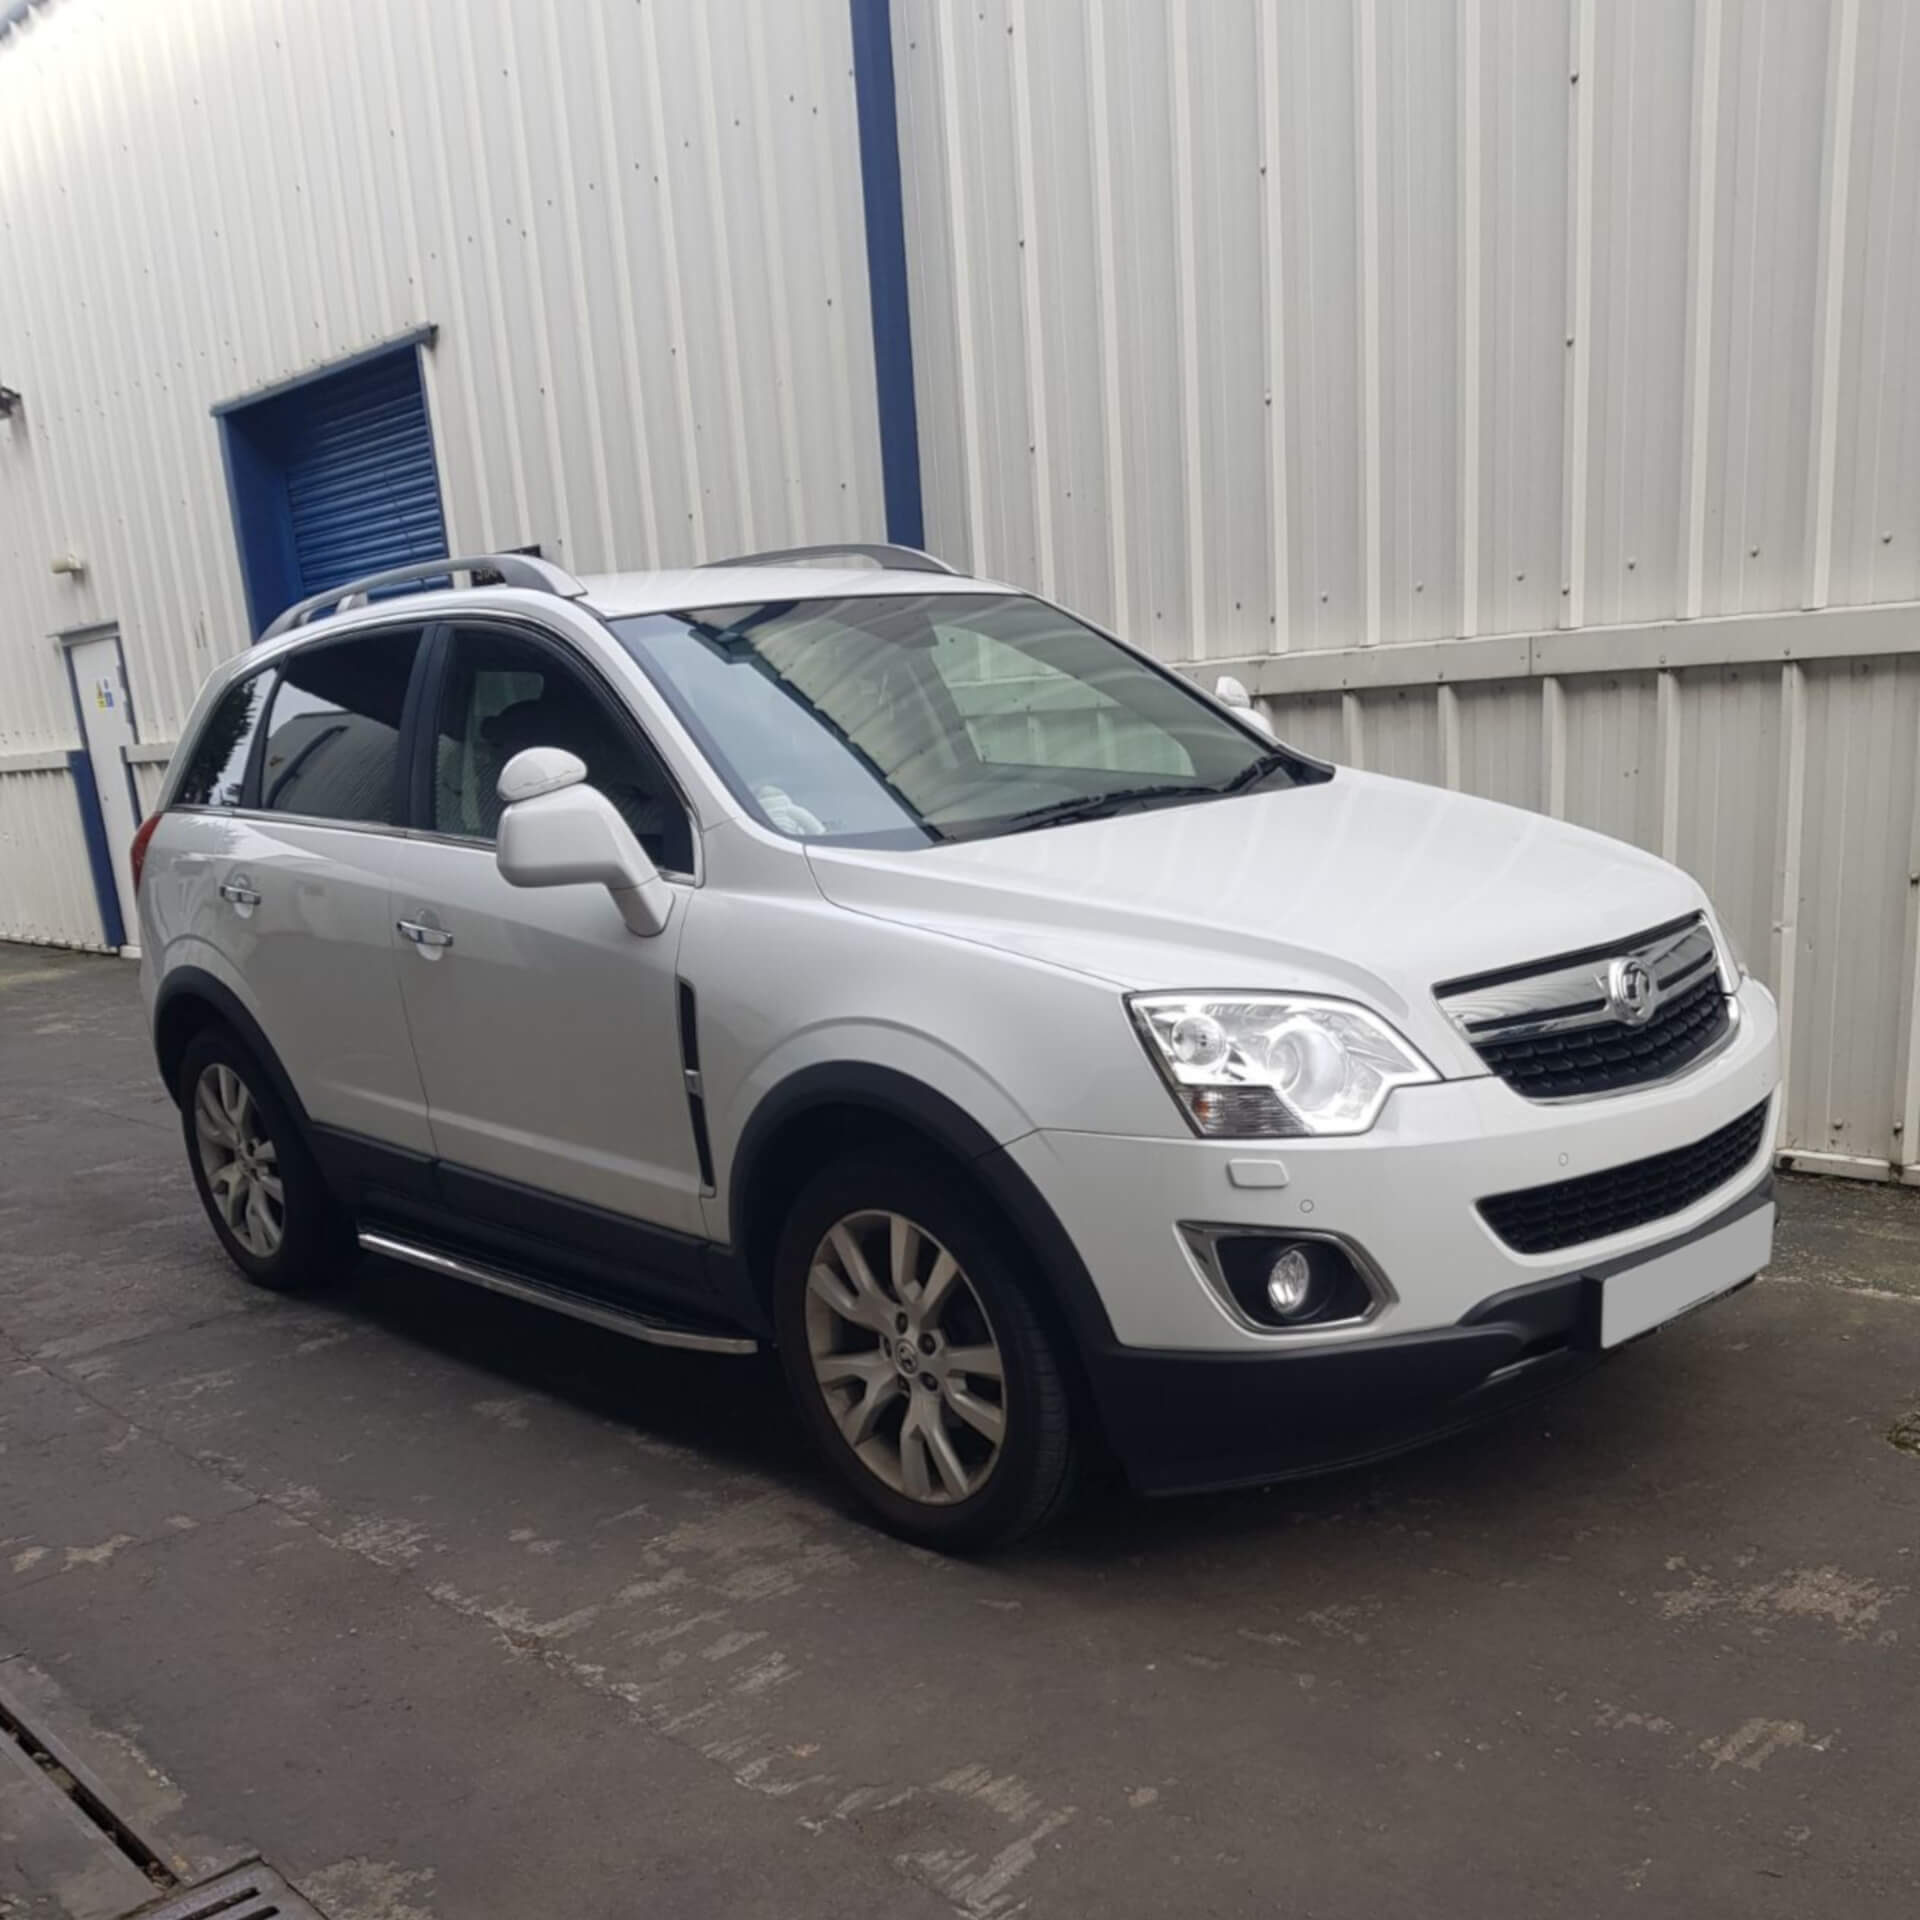 Direct4x4 accessories for Vauxhall Antara vehicles with a photo of a white Vauxhall Antara parked outside our depot